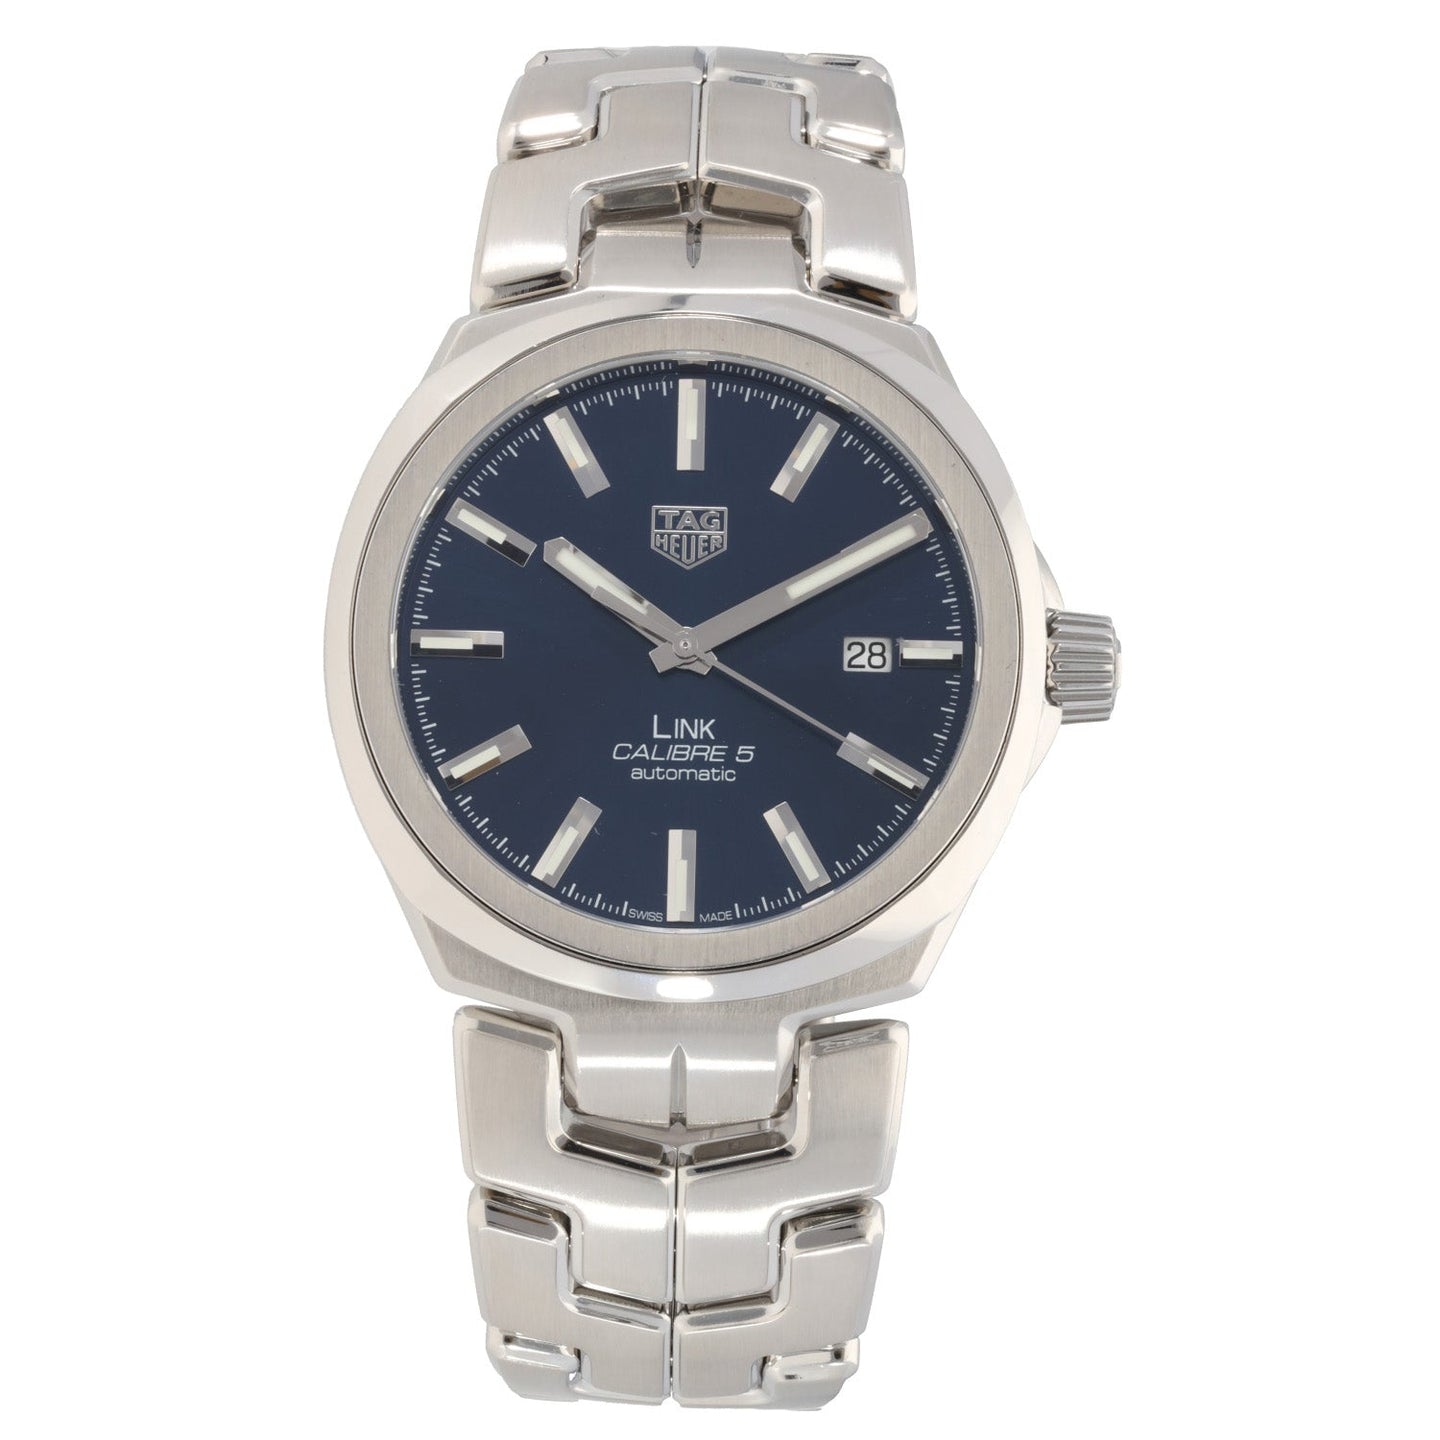 Tag Heuer Link WBC2112 41mm Stainless Steel Watch